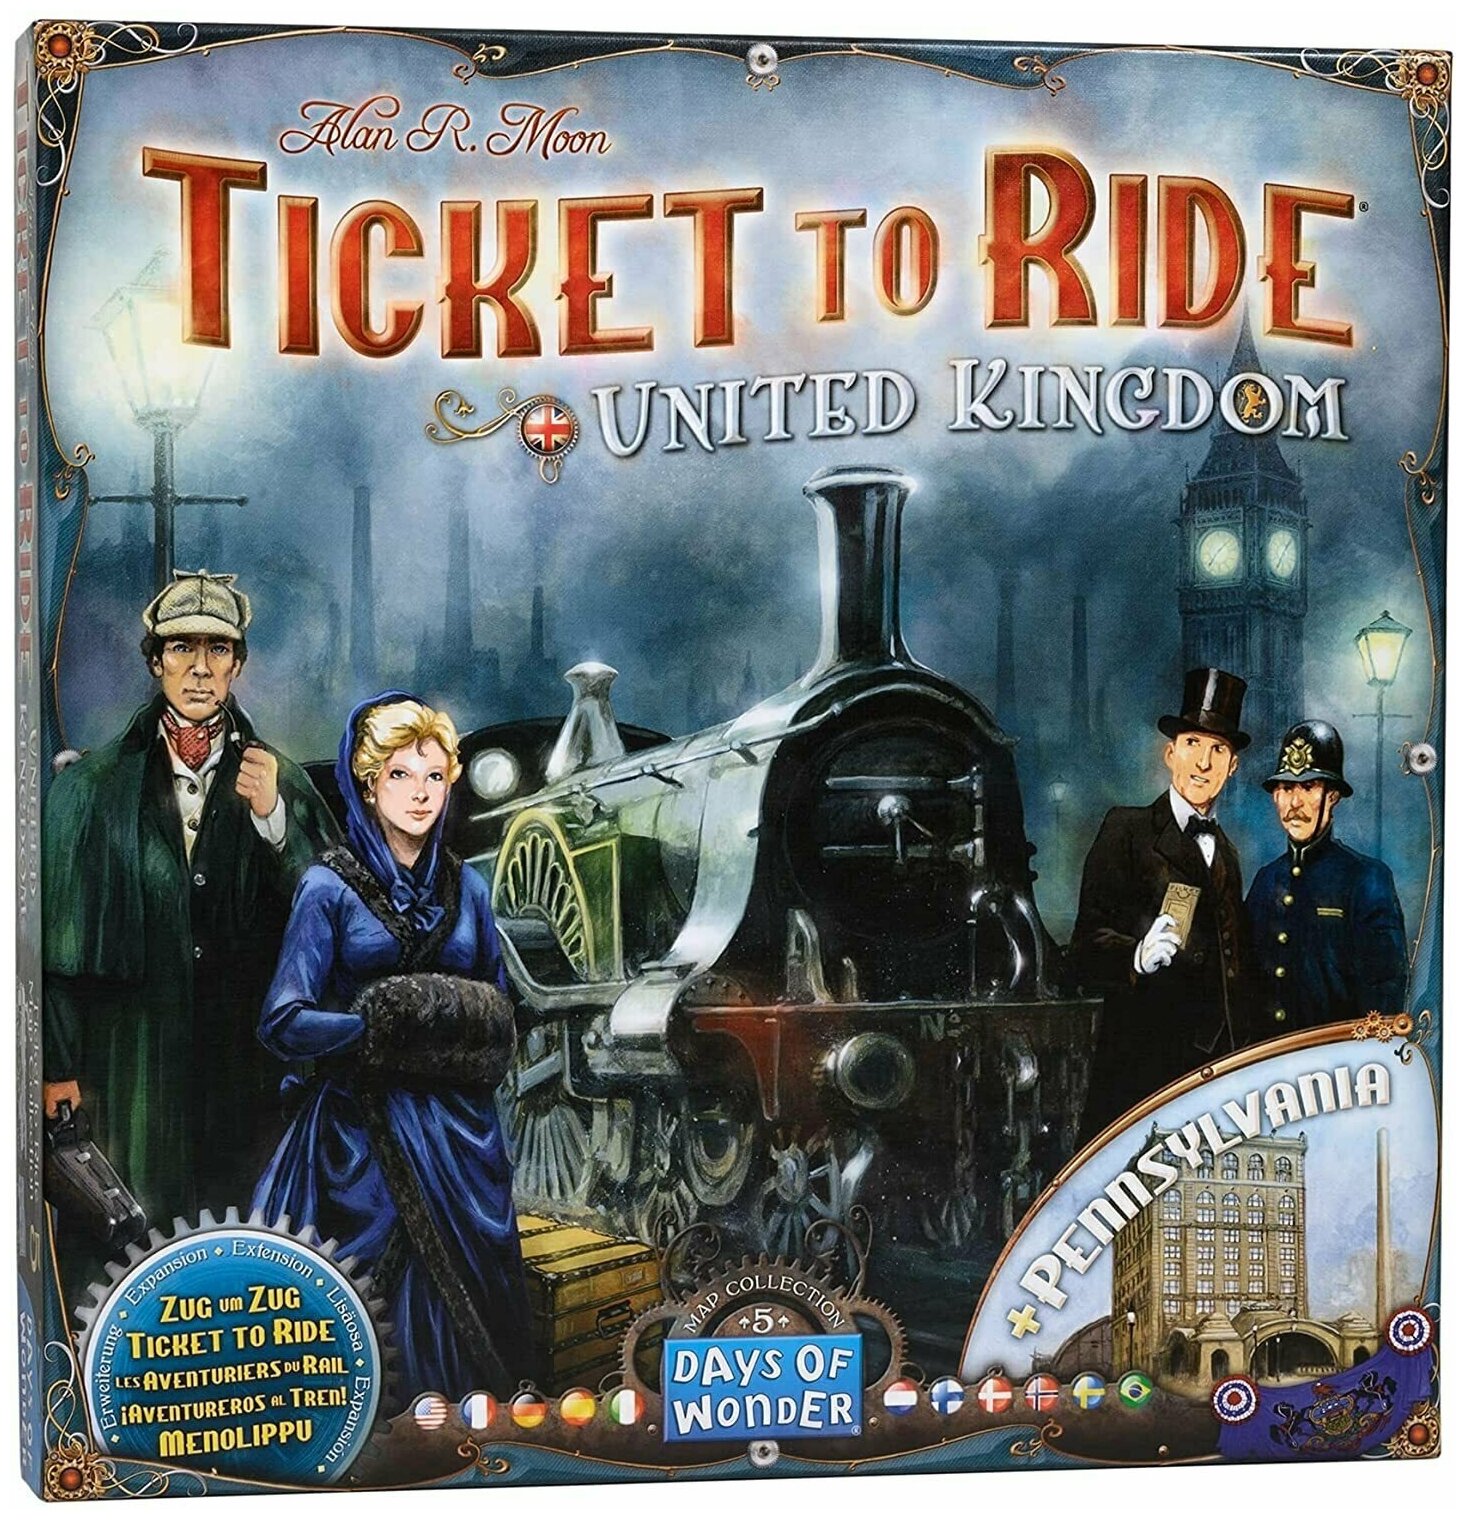 Steam or ticket to ride фото 48